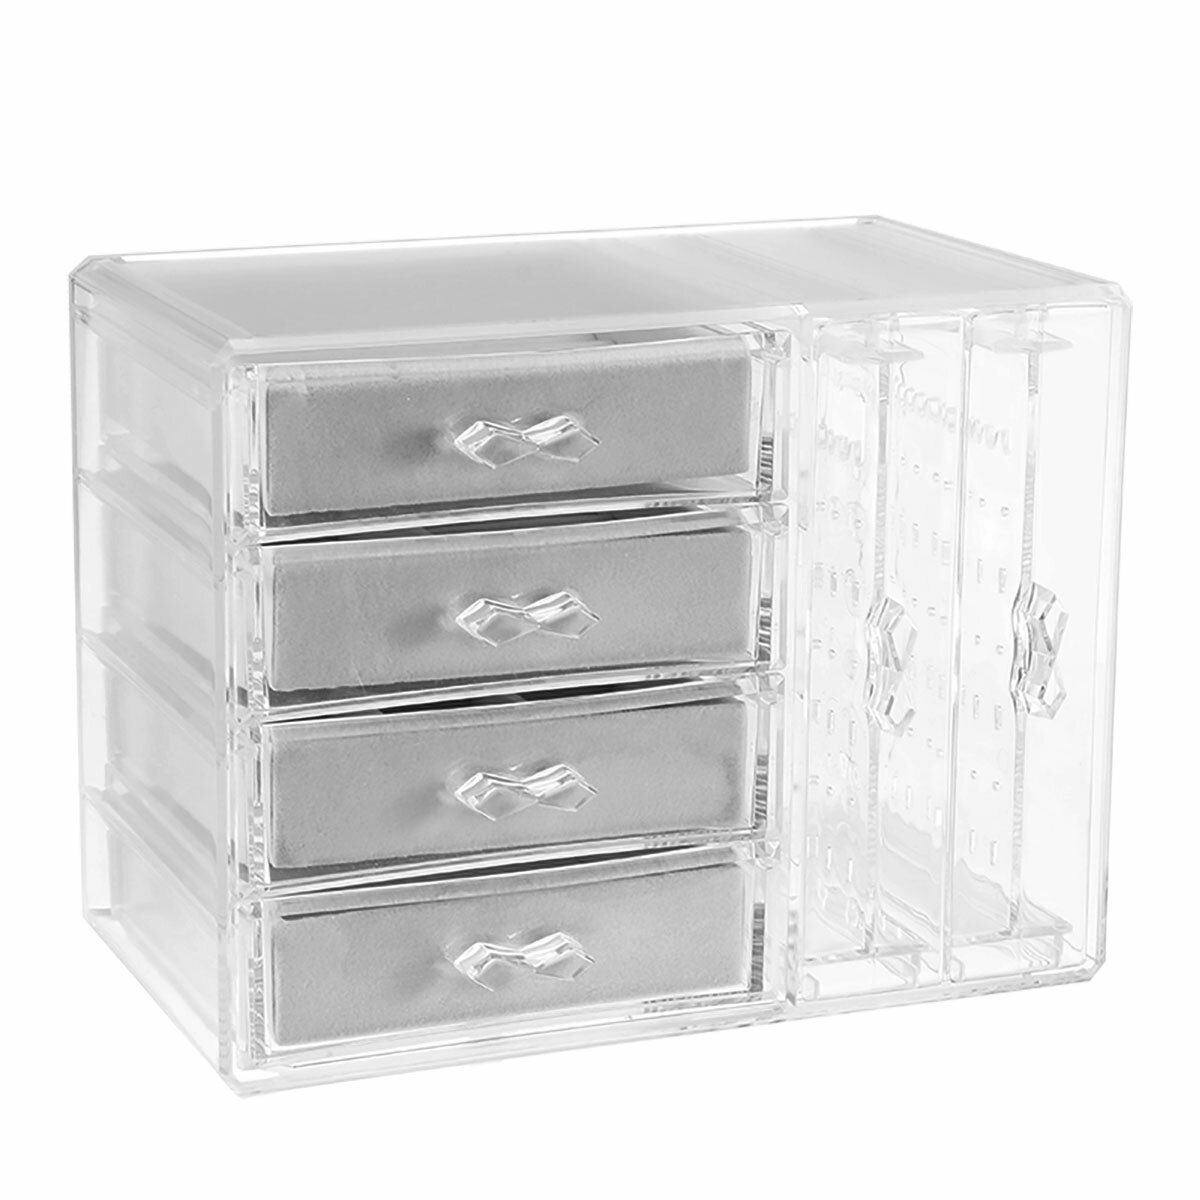 Image of Dustproof Transparent Acrylic Earrings Jewelry Storage Box Display Stand Rack Tray